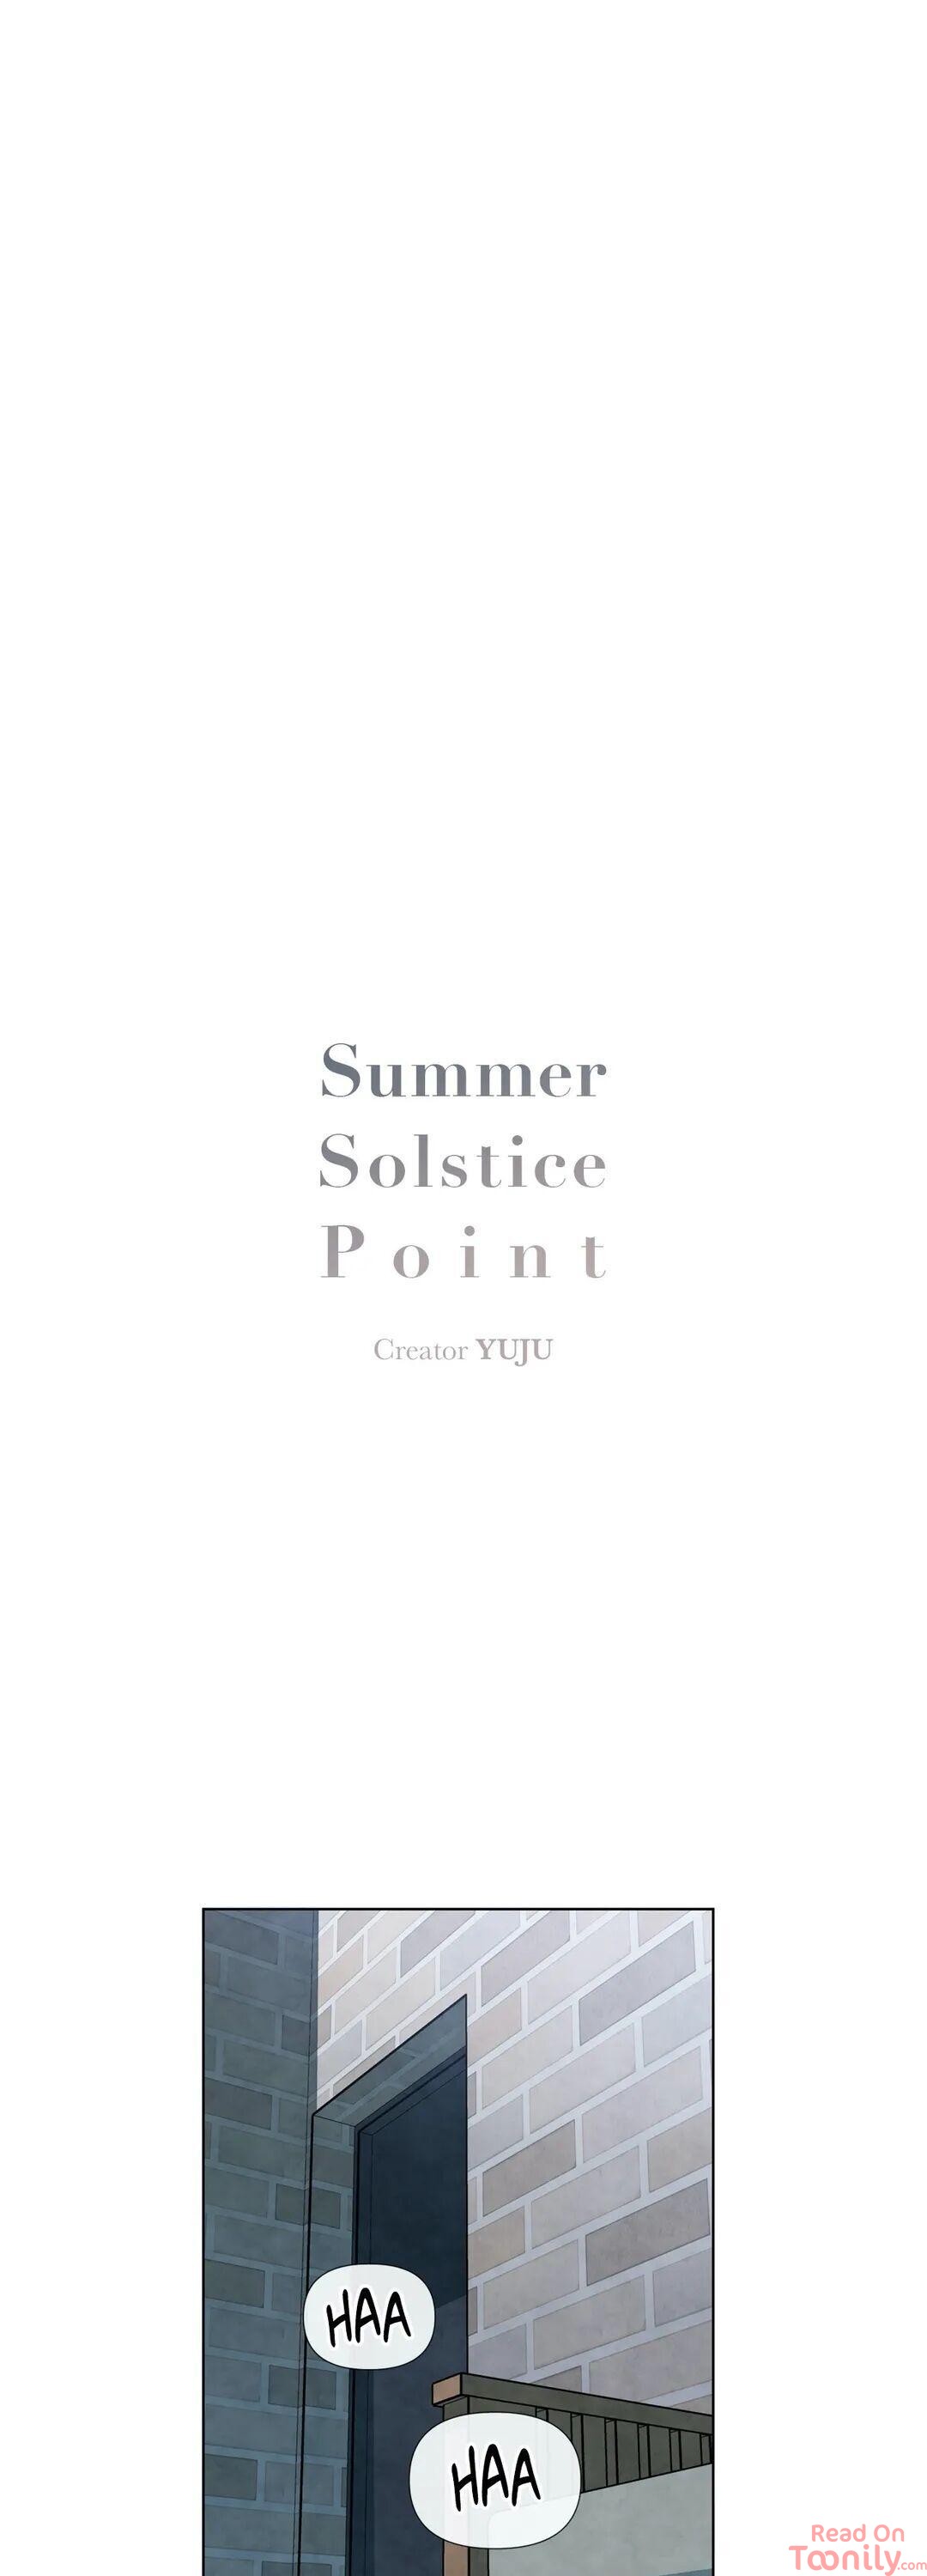 Summer Solstice Point image